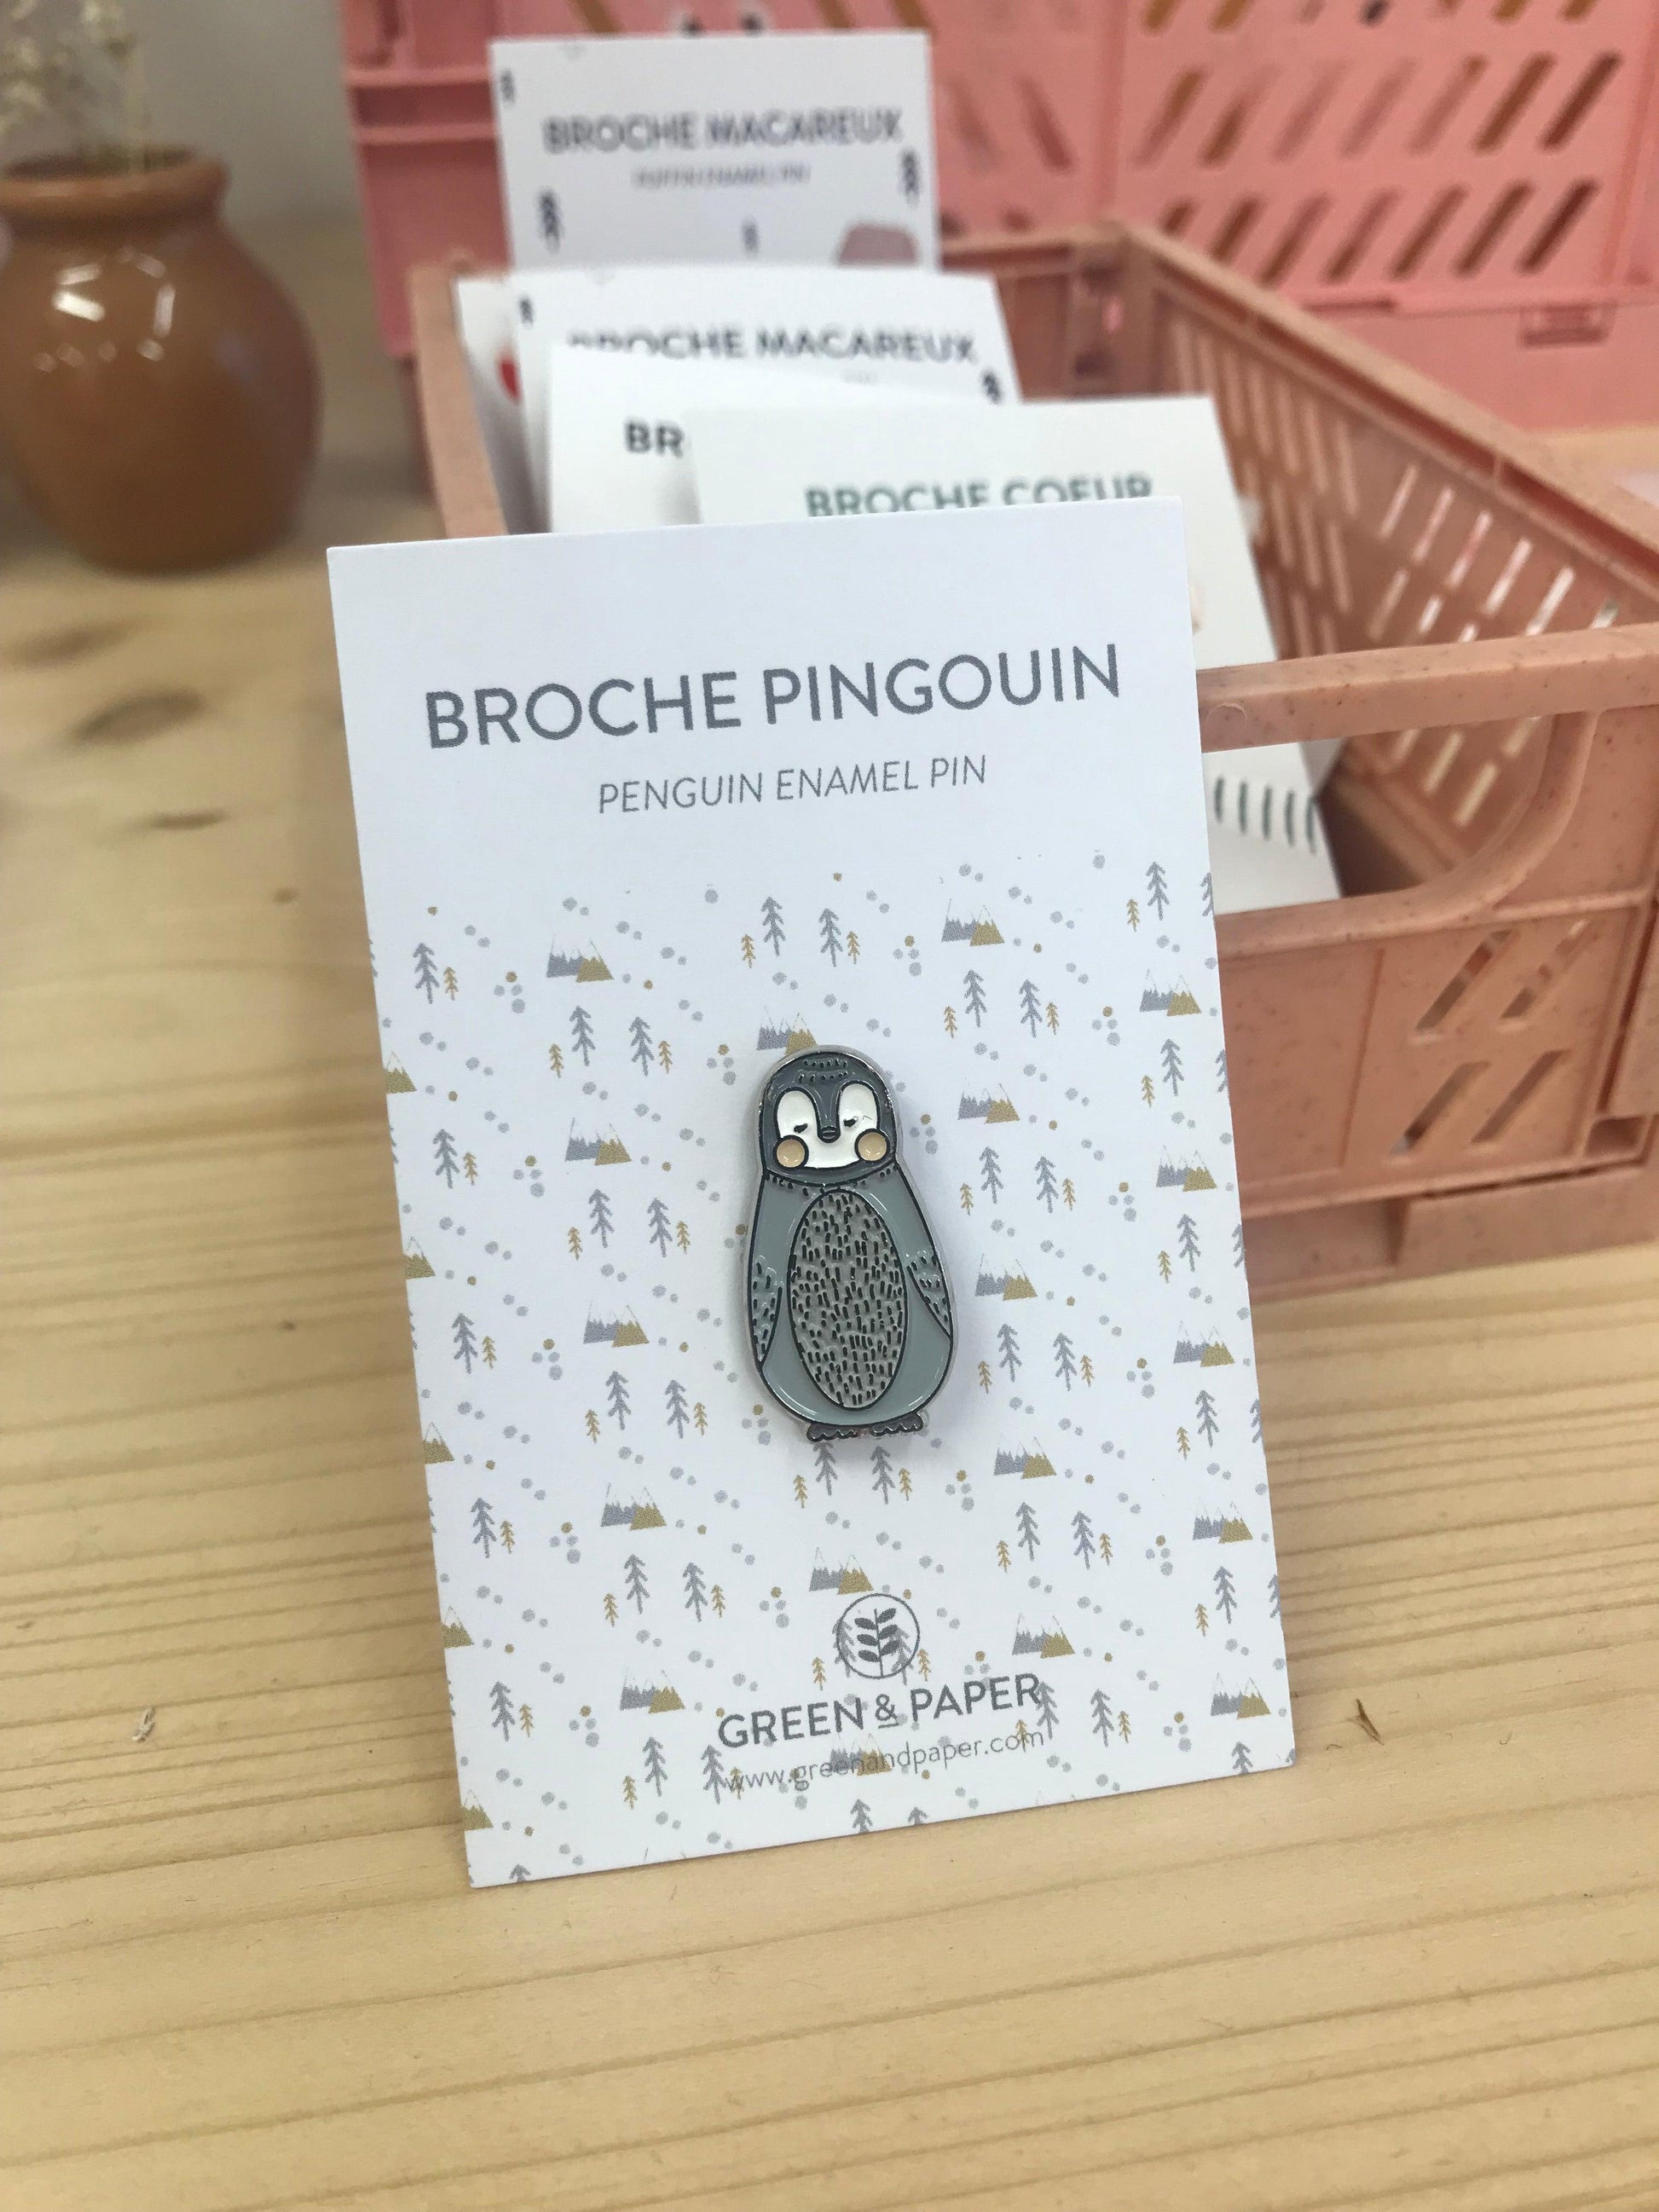 Broche pins pingouin Green and Paper